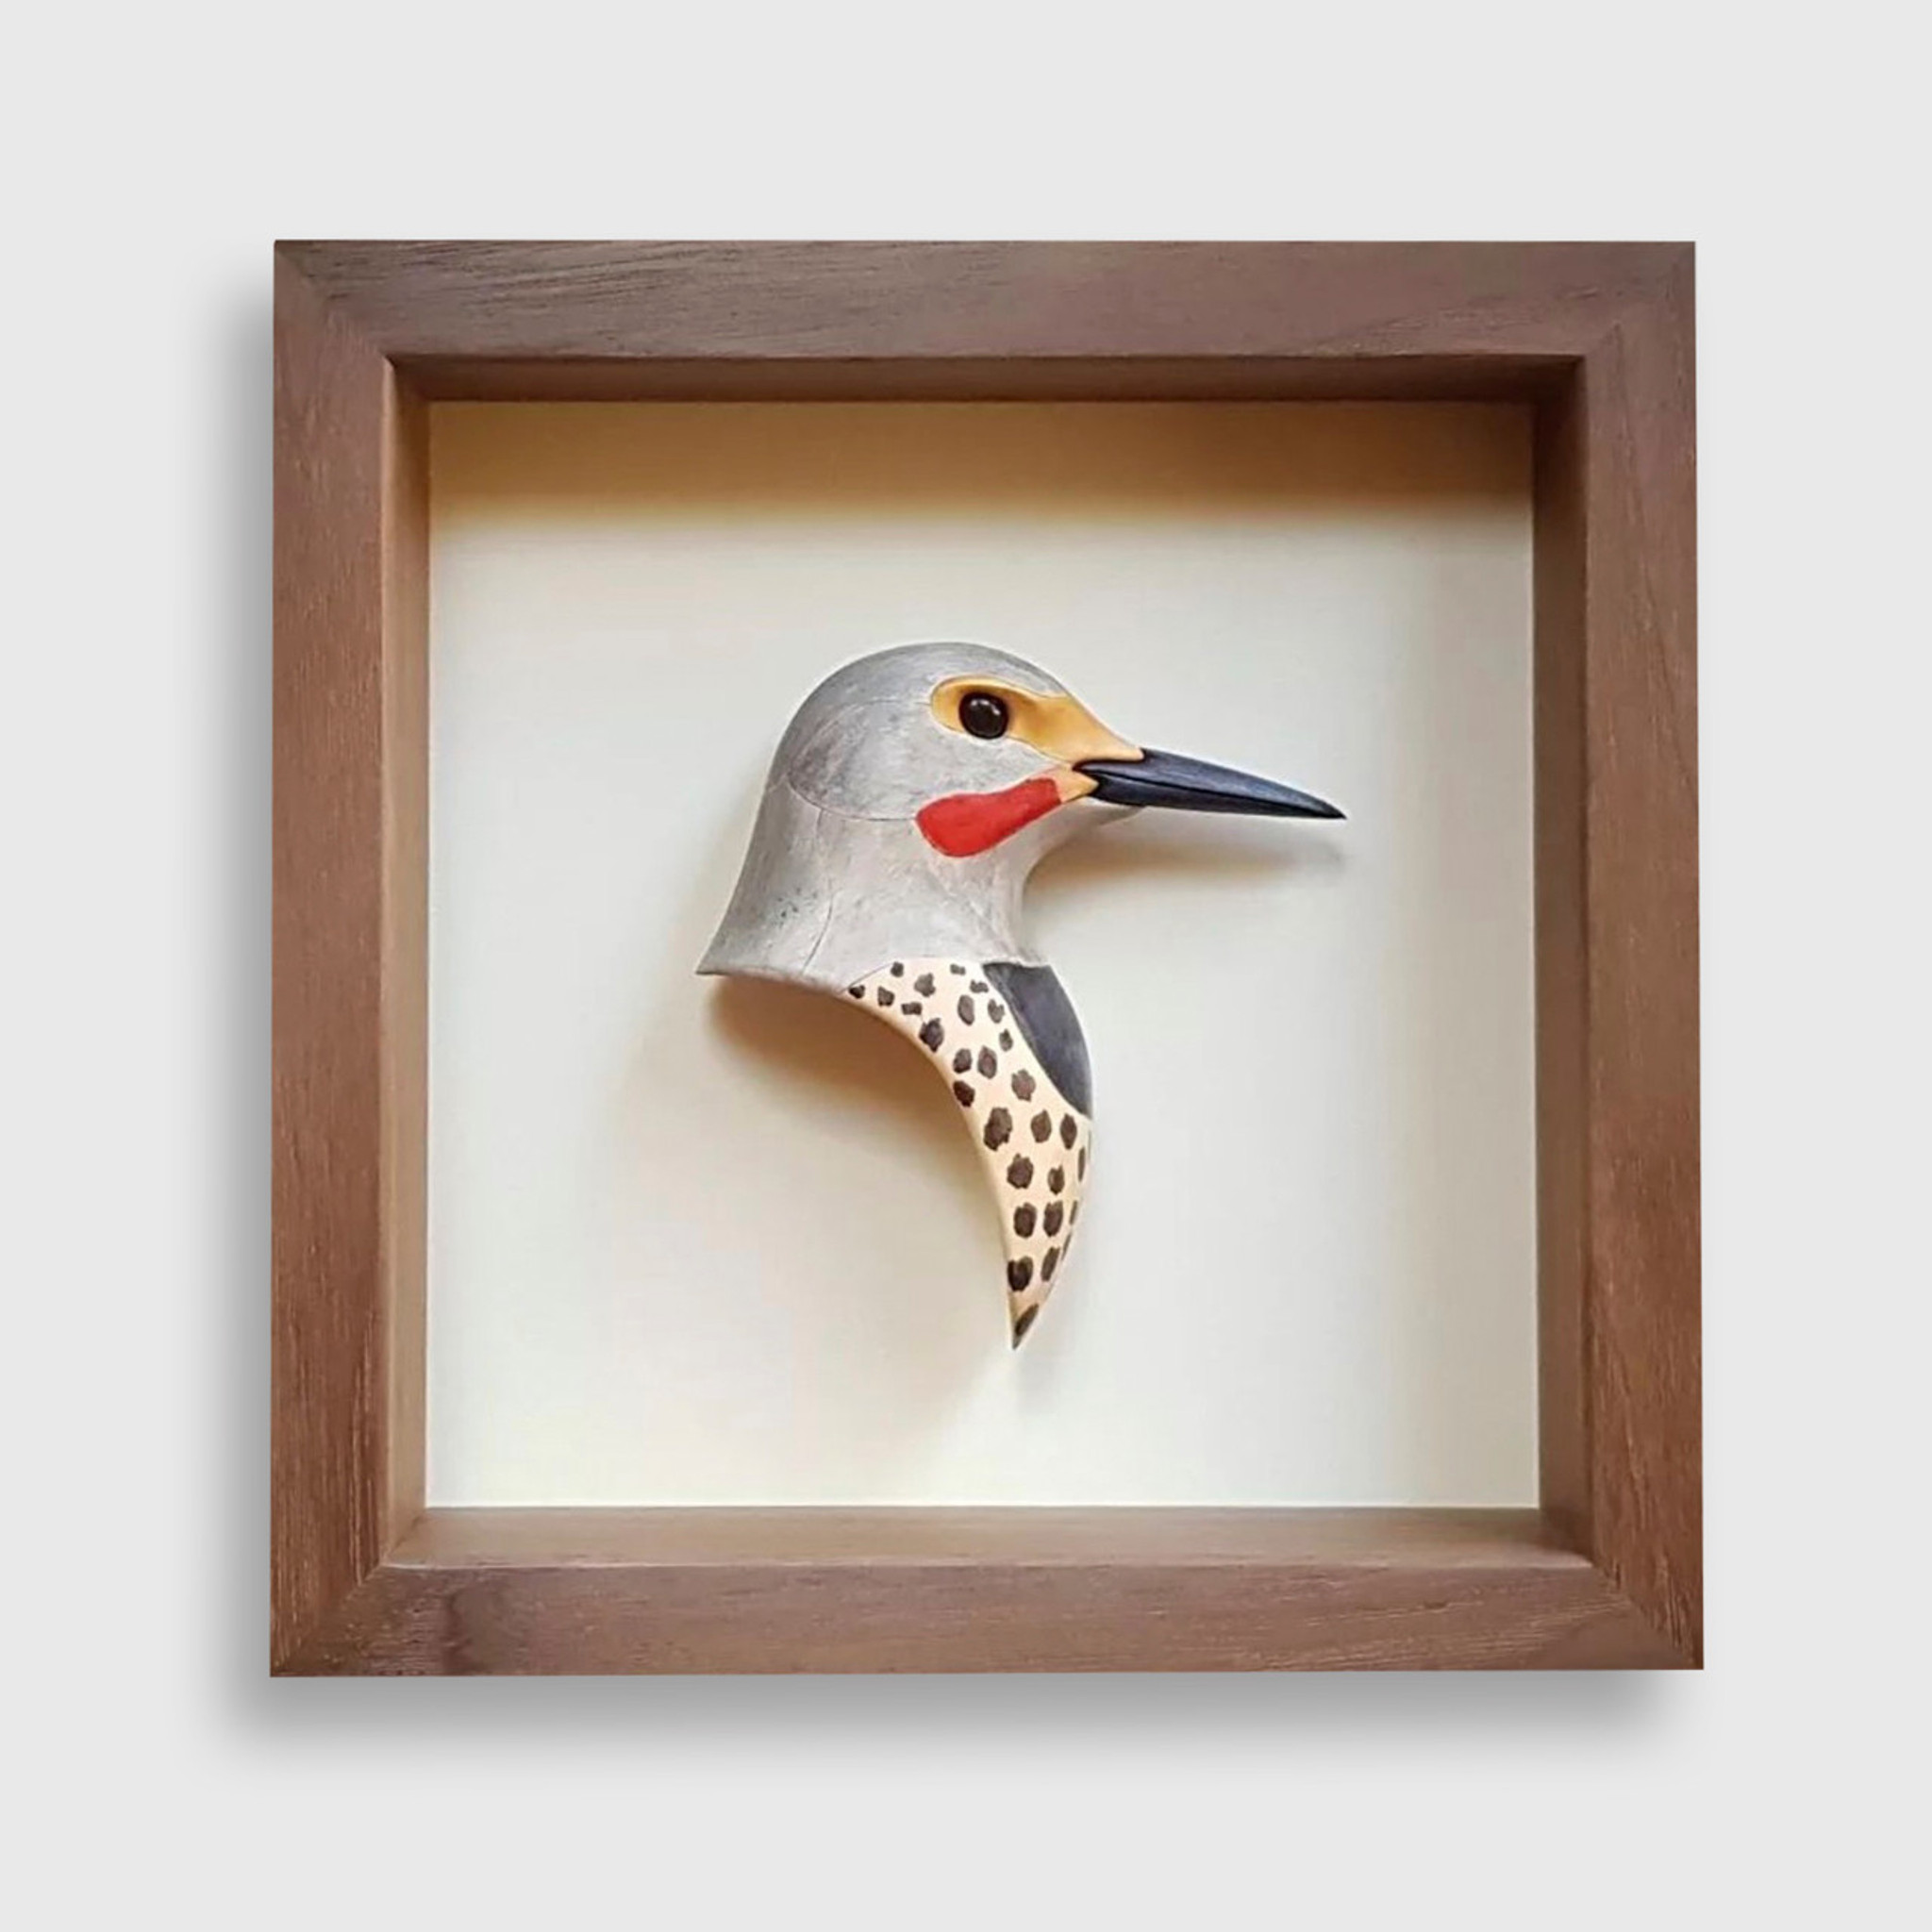 T.A.G. (Tom) Smith Northern Flicker, from the Montana Bird Series 